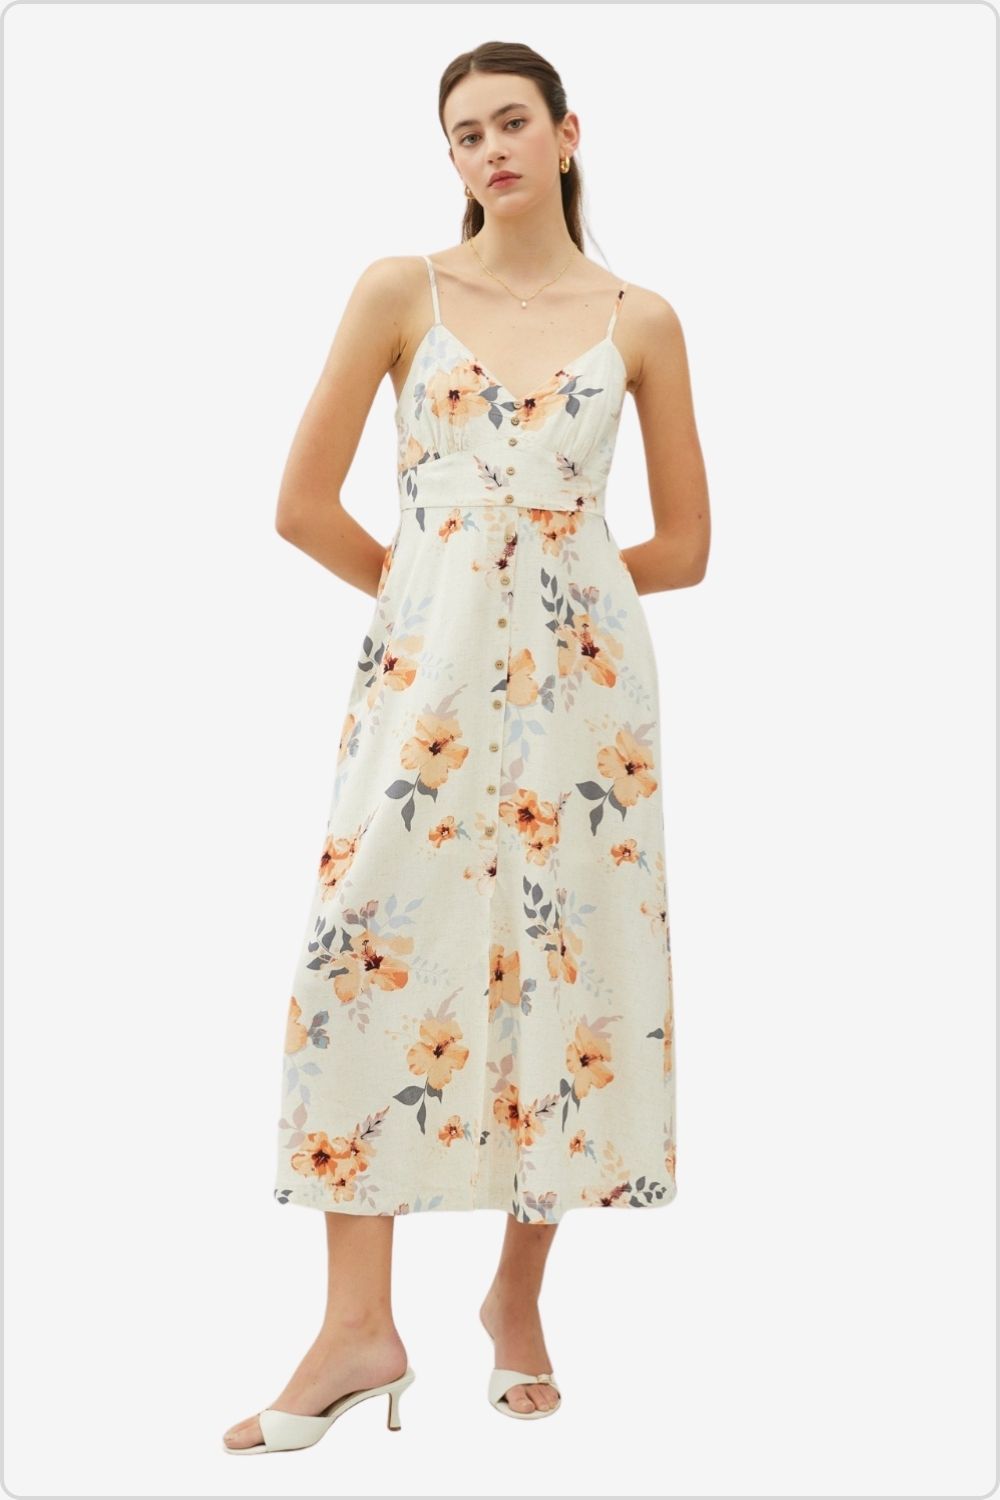 Stylish Floral Button Down Cami Midi Dress, ideal for adding elegance to your wardrobe